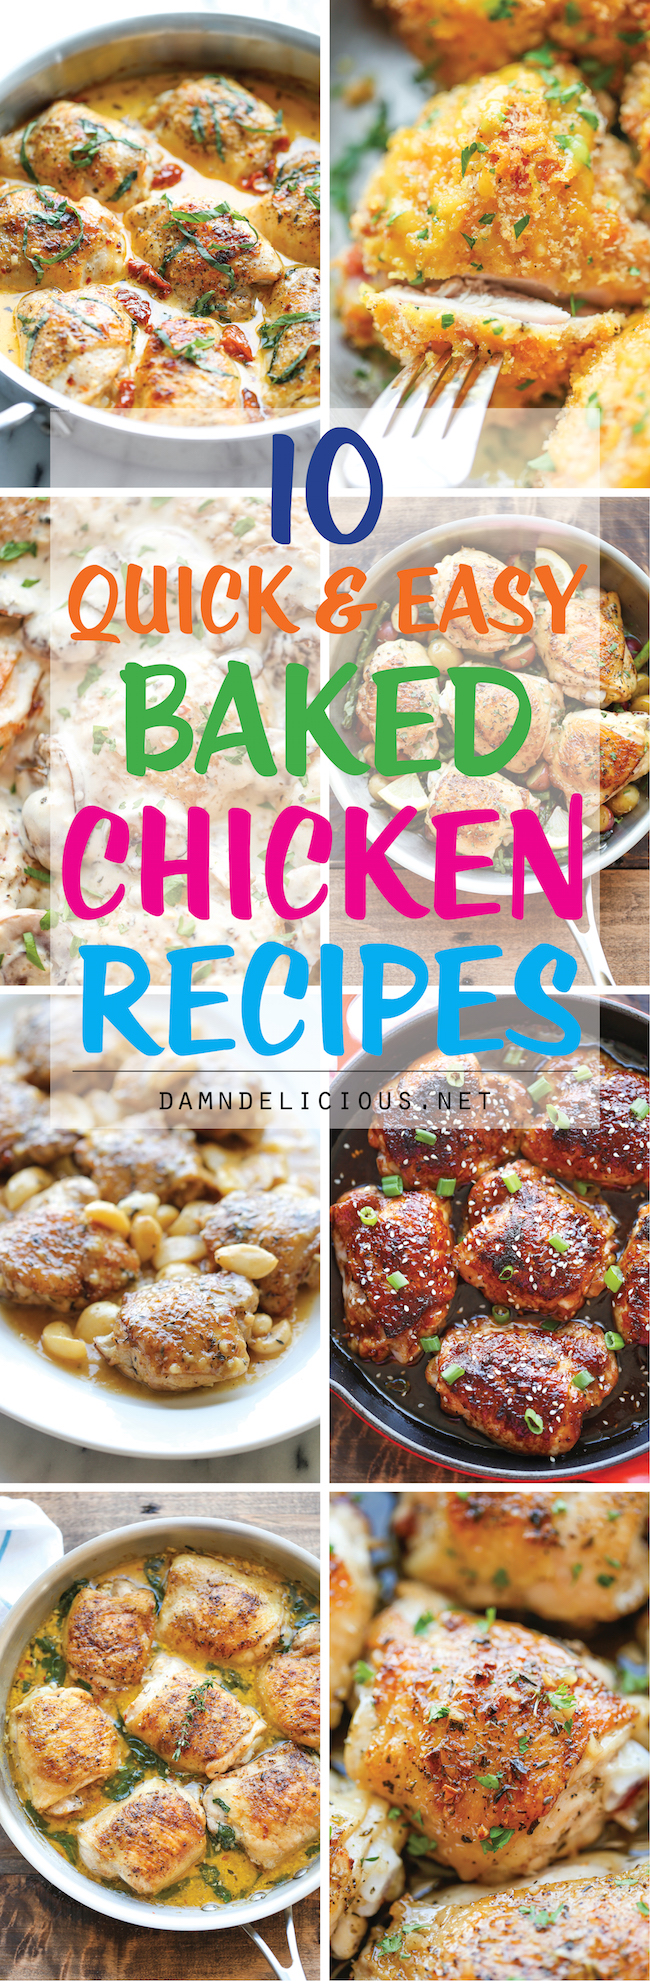 10 Quick and Easy Baked Chicken Recipes - Damn Delicious